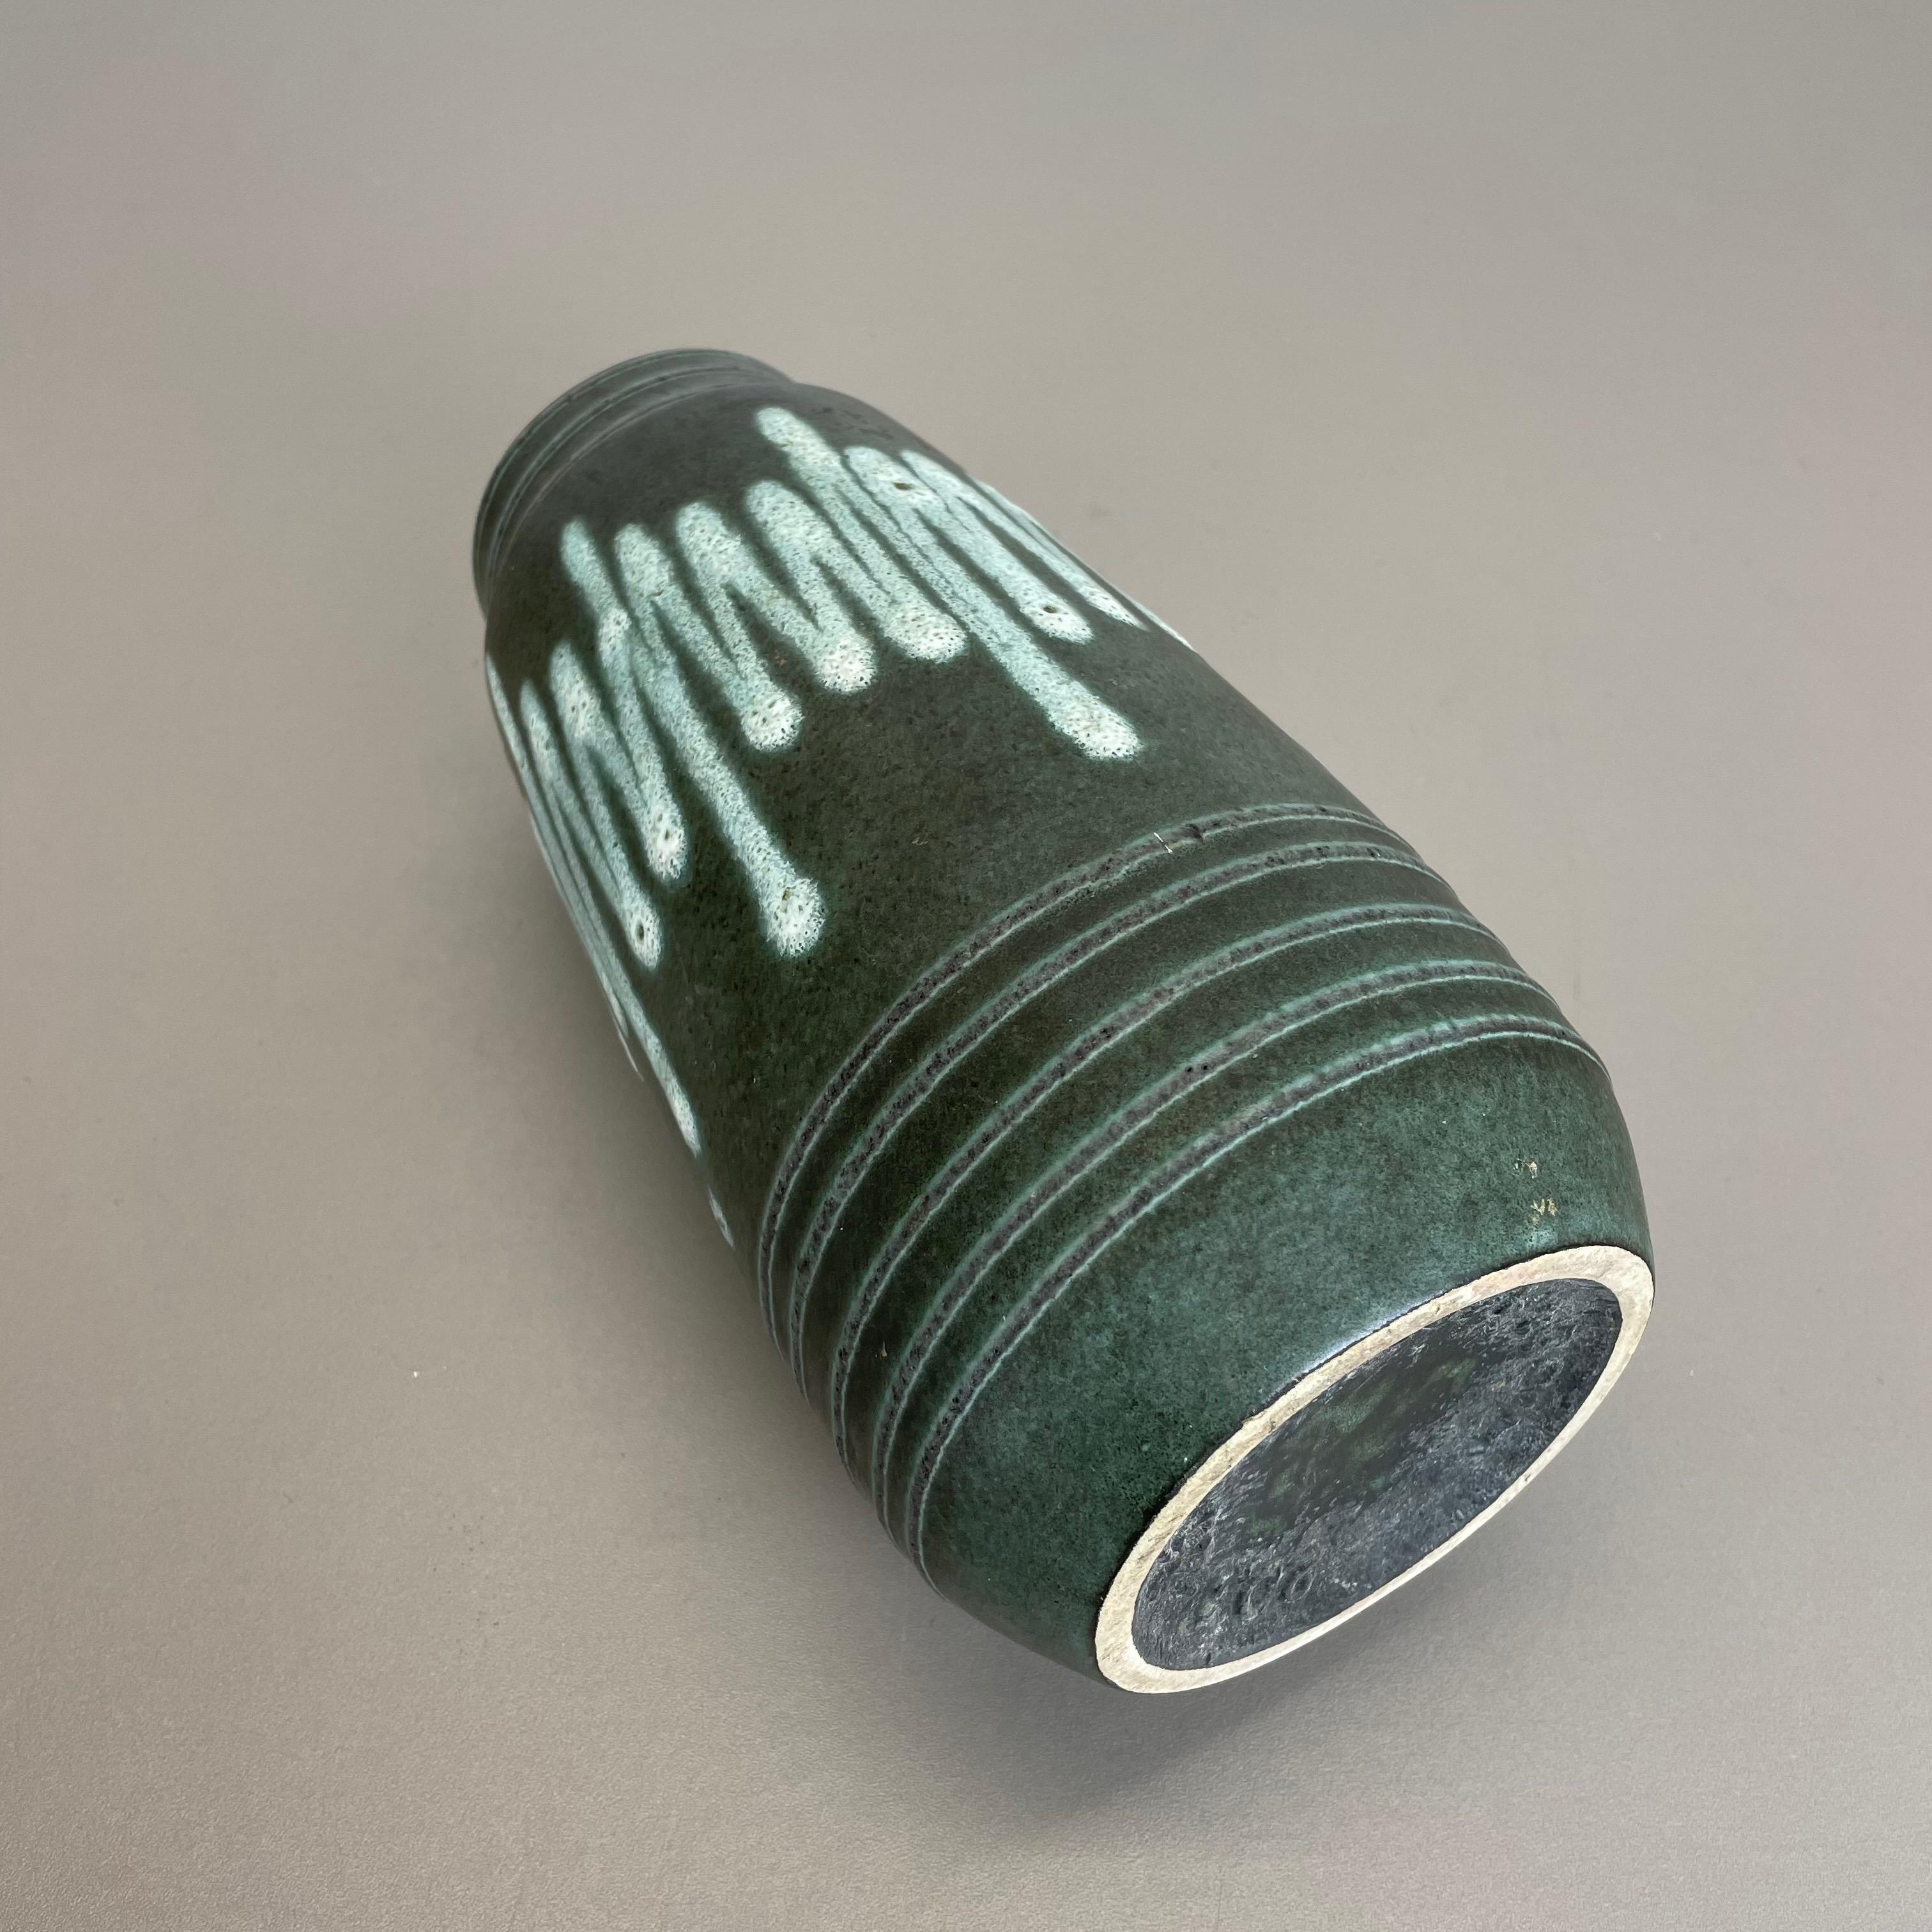 Extraordinary Zig Zag Pottery Fat Lava Vase Made by Scheurich, Germany, 1970s For Sale 5